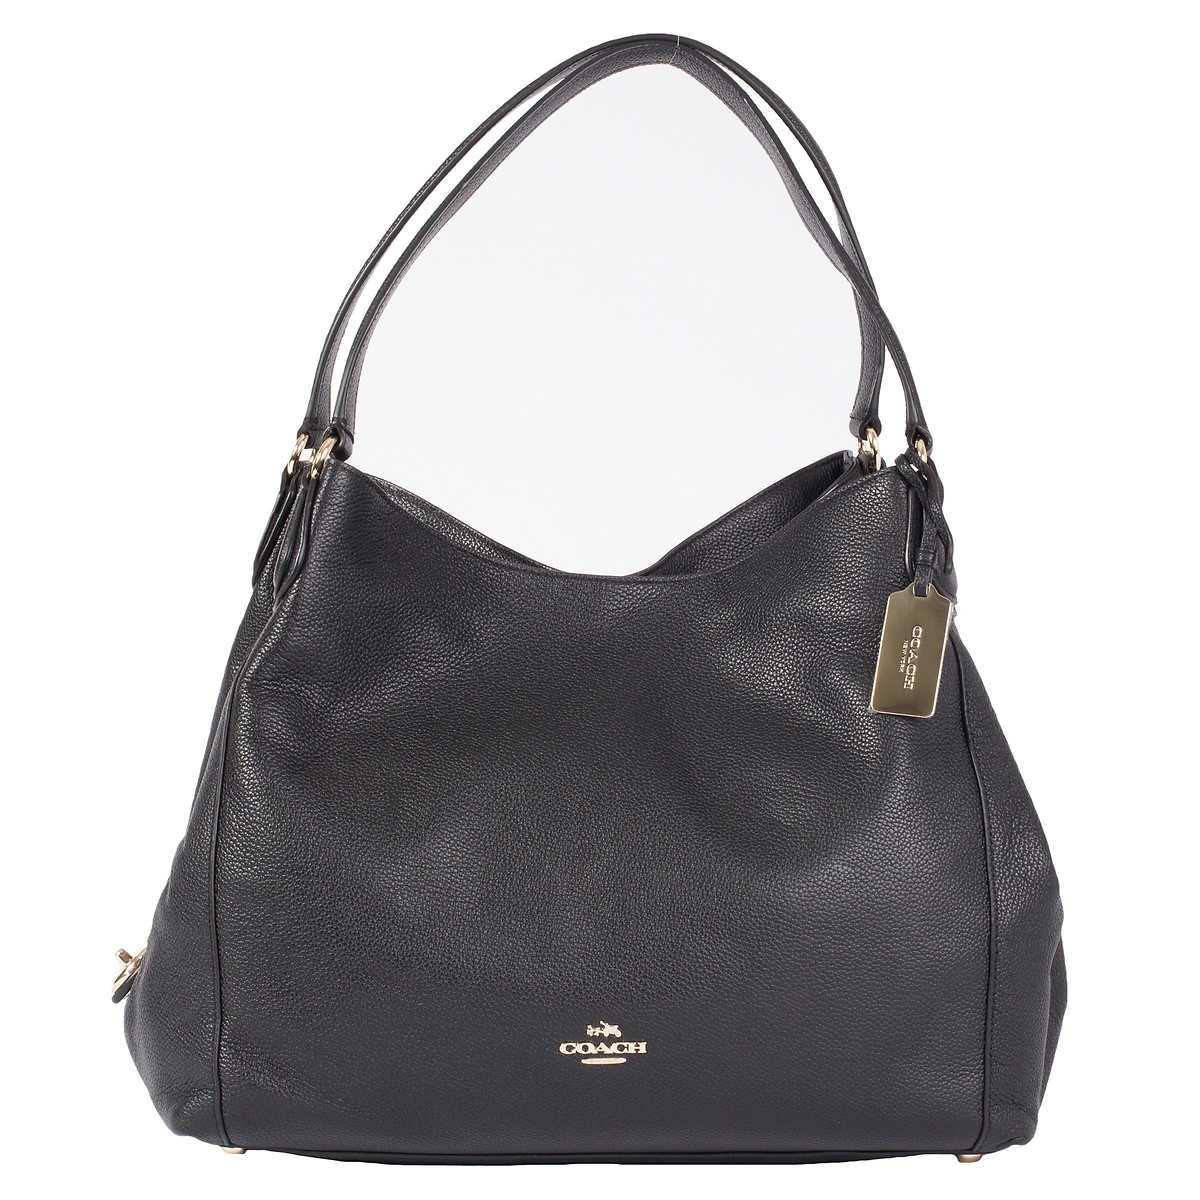 COACH Trail Bag in Black Smooth Leather